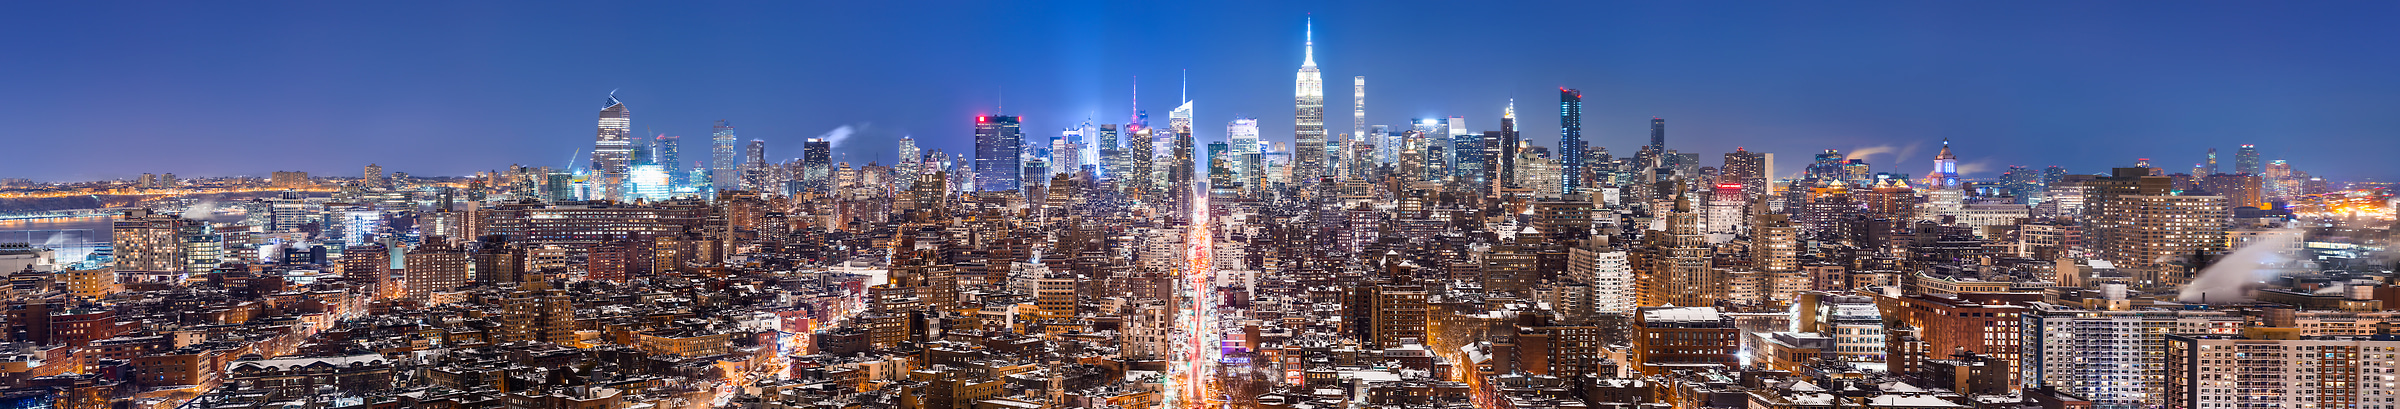 4,636 megapixels! A very high definition, large-format VAST photo print of the NYC skyline in winter snow at night; cityscape fine art photo created by Dan Piech in New York City